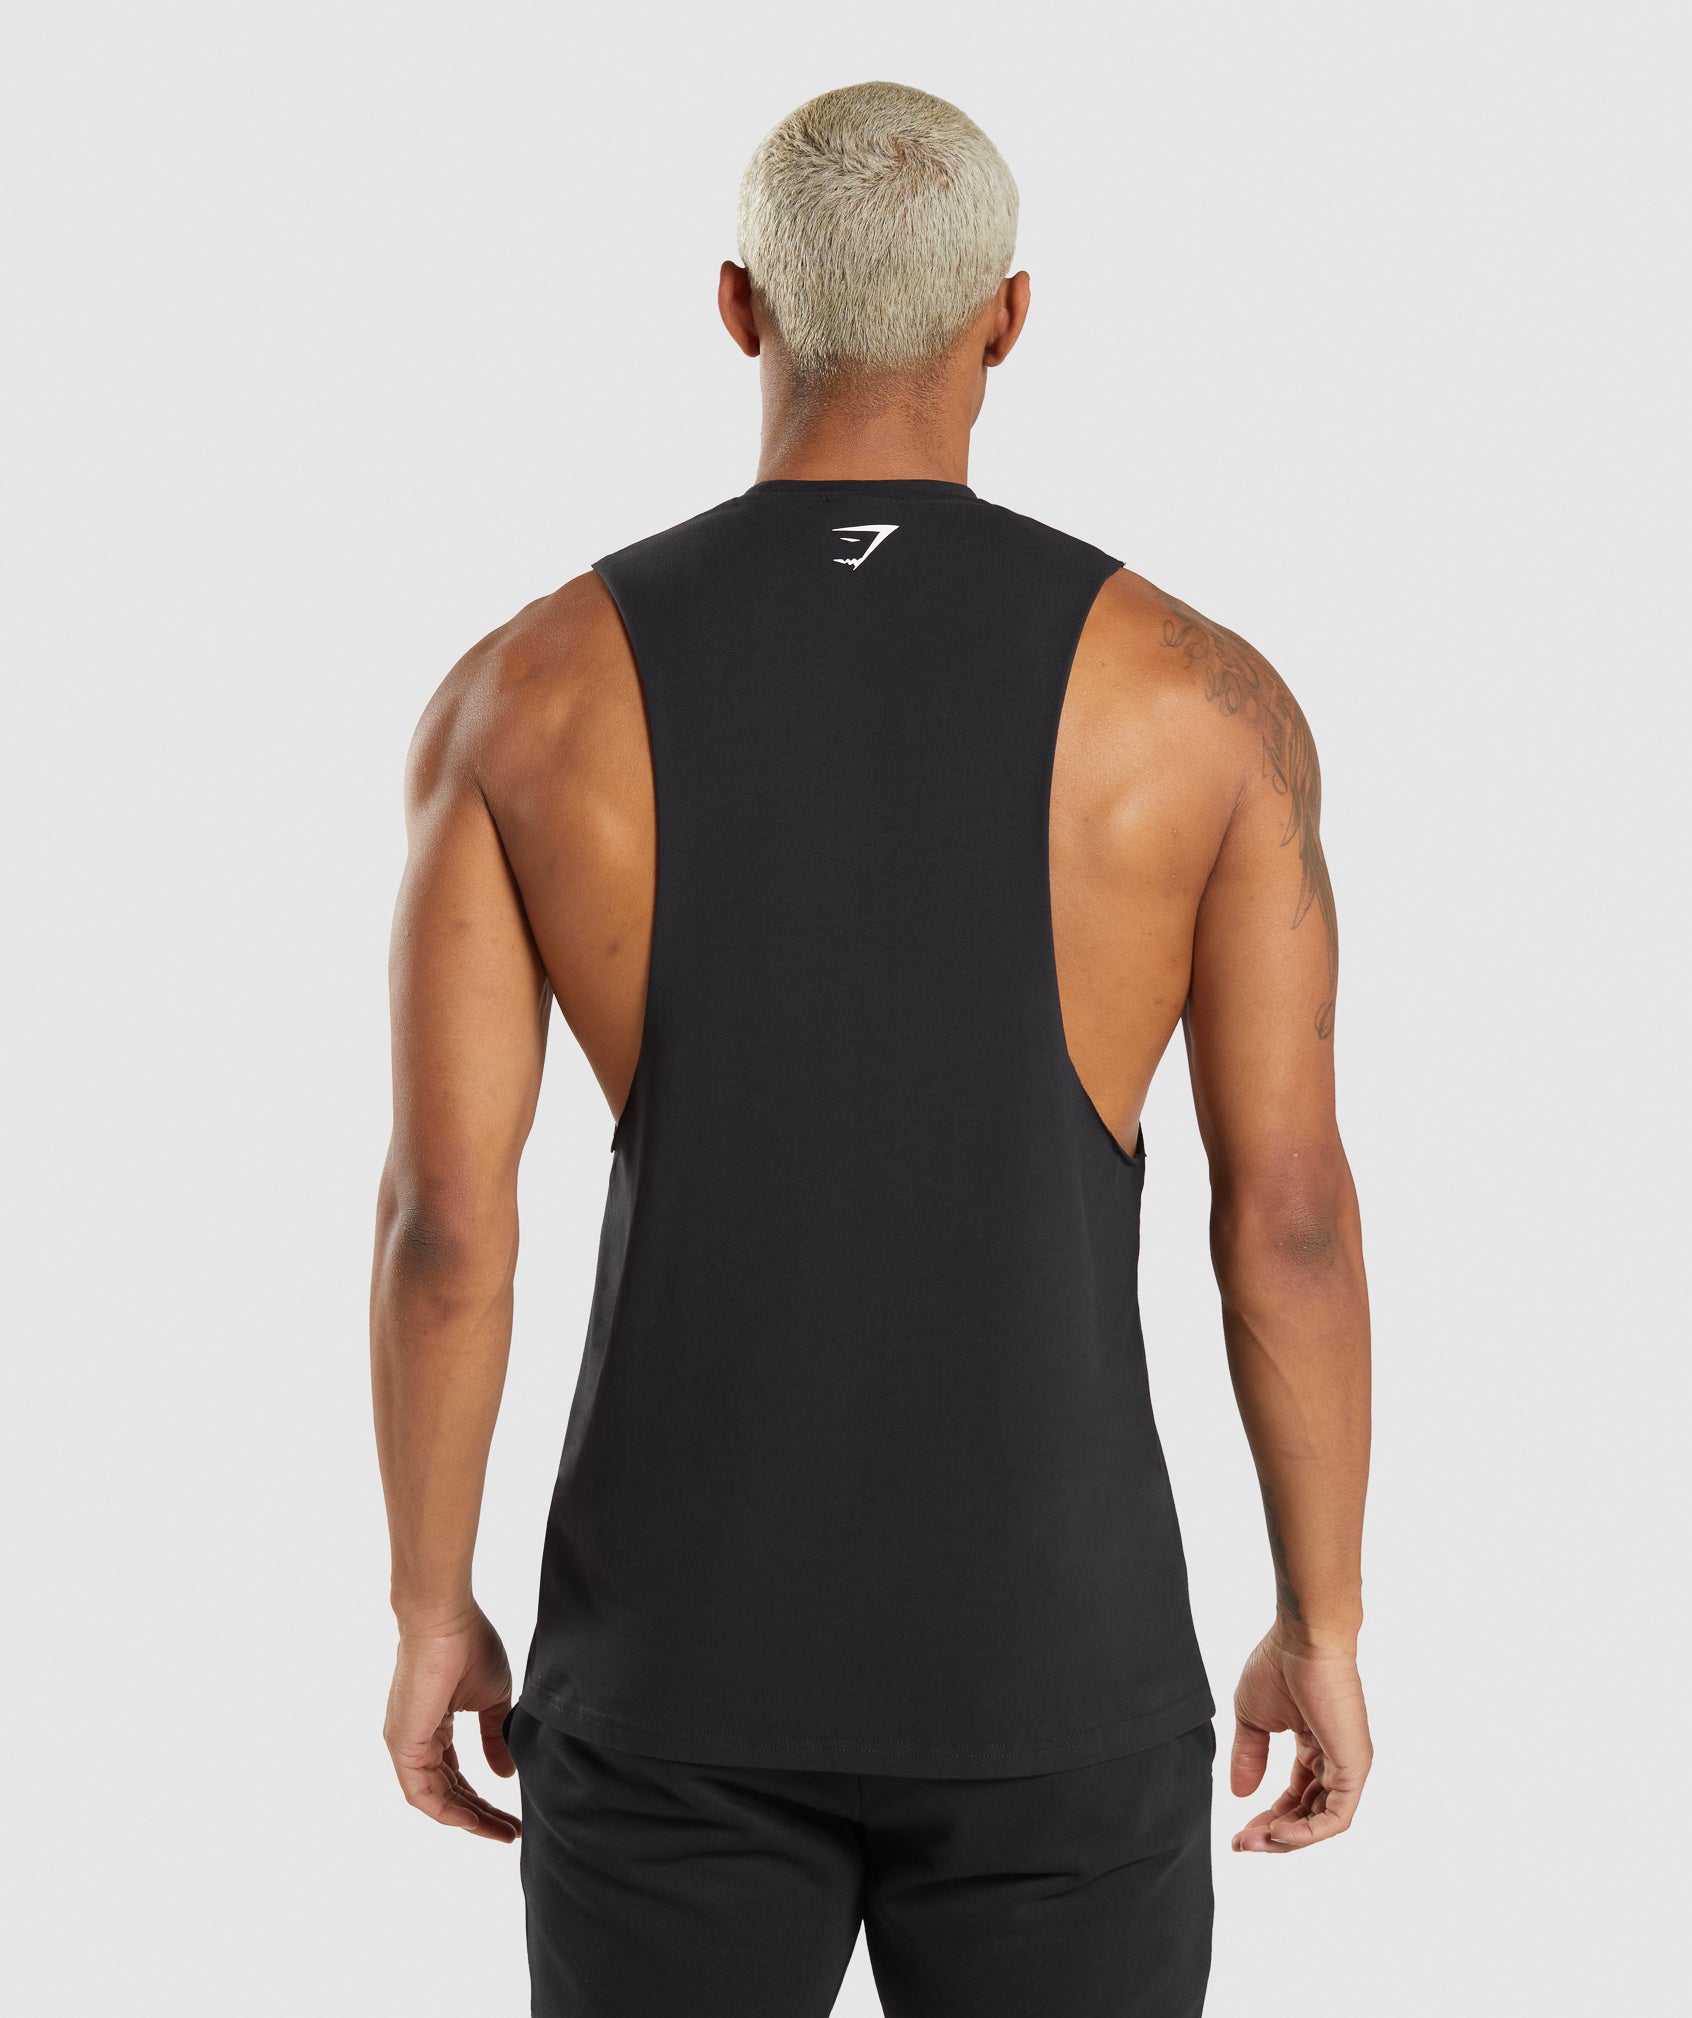 Its All You Drop Arm Tank in Black - view 2